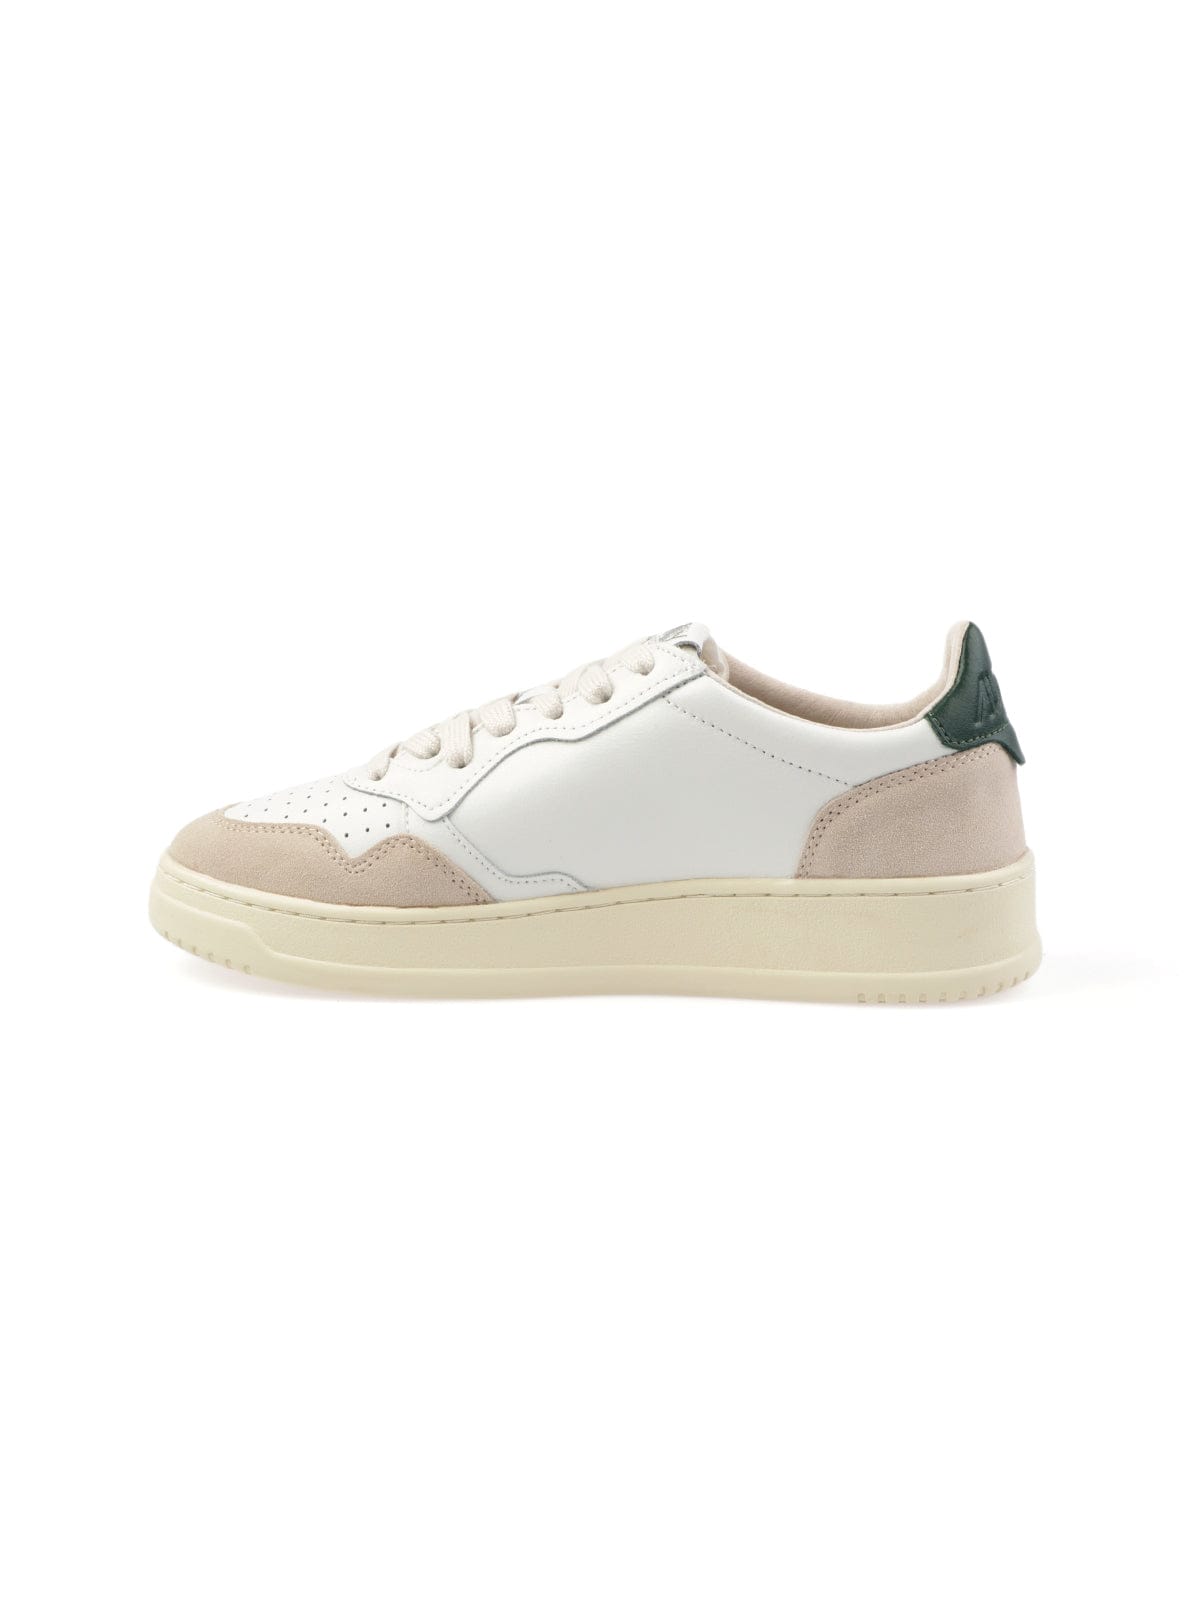 Autry Medalist Low Man Leather Suede White Mountain